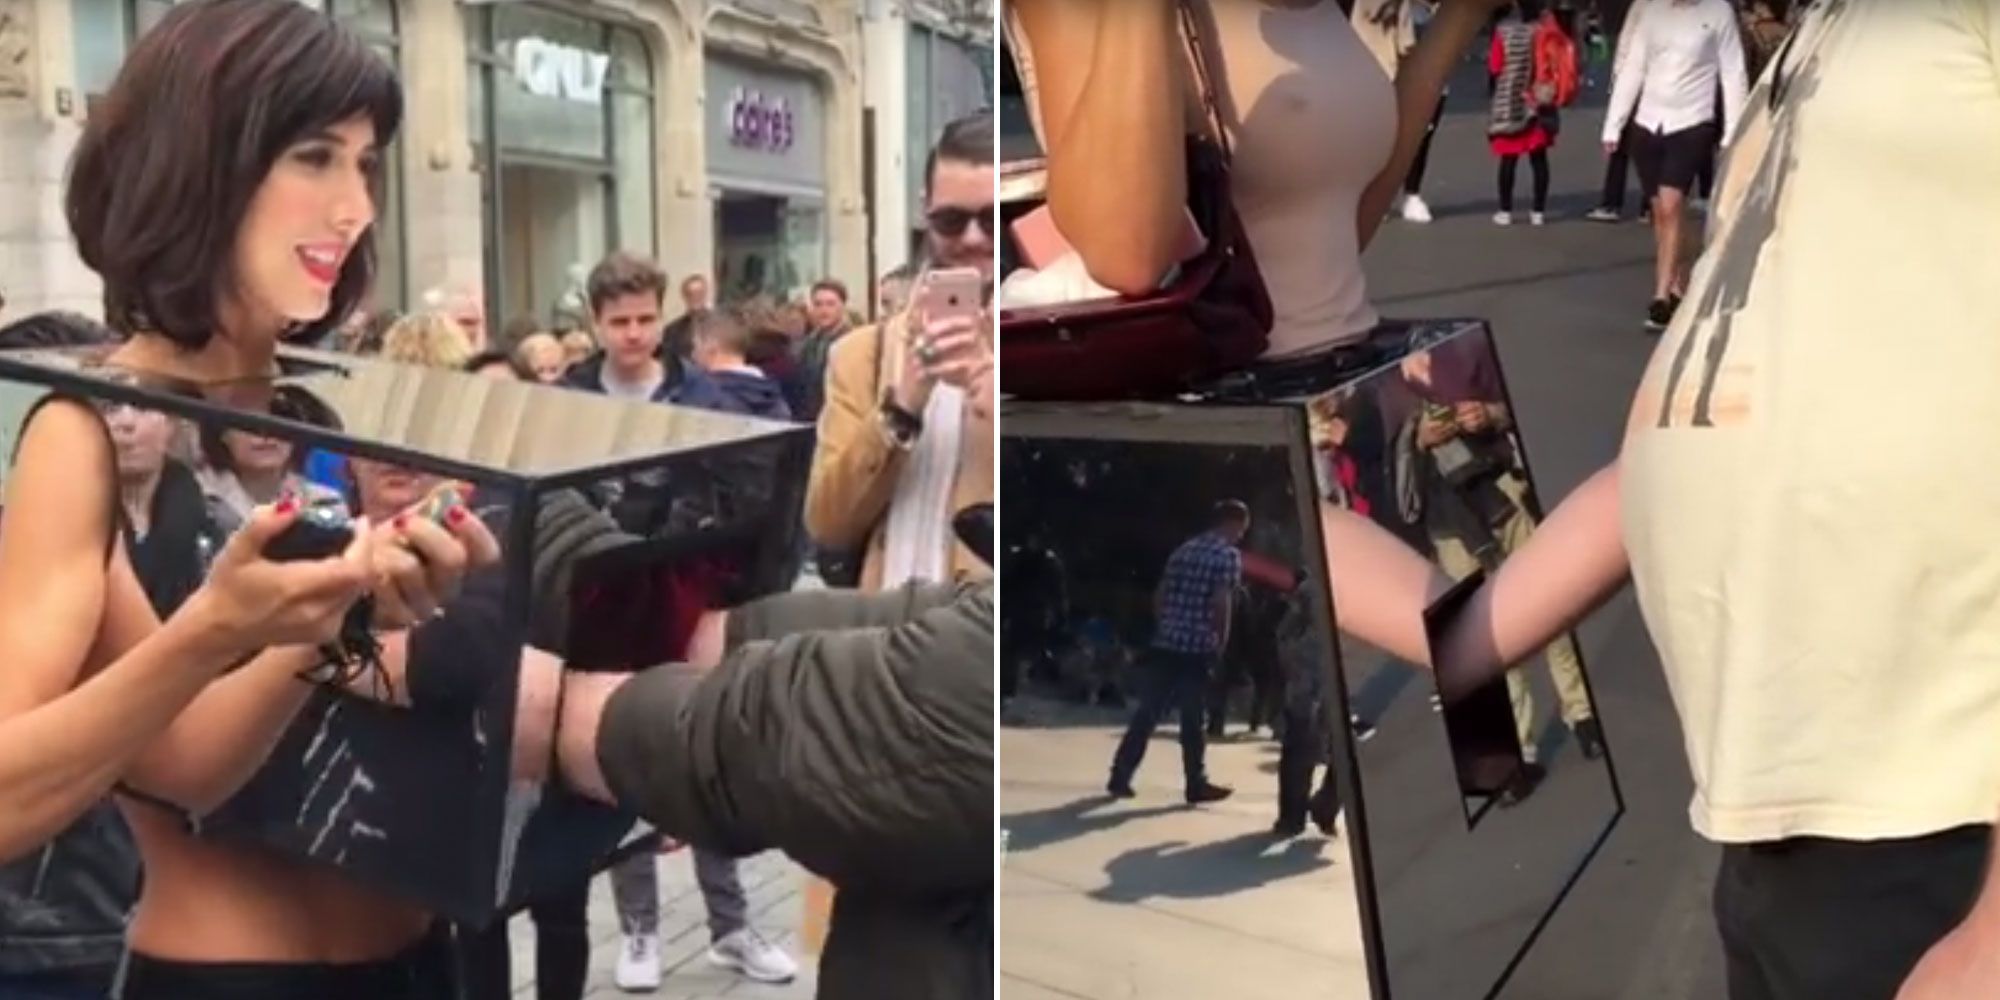 Artist Milo Moire Let People Touch Her Vagina in Public picture